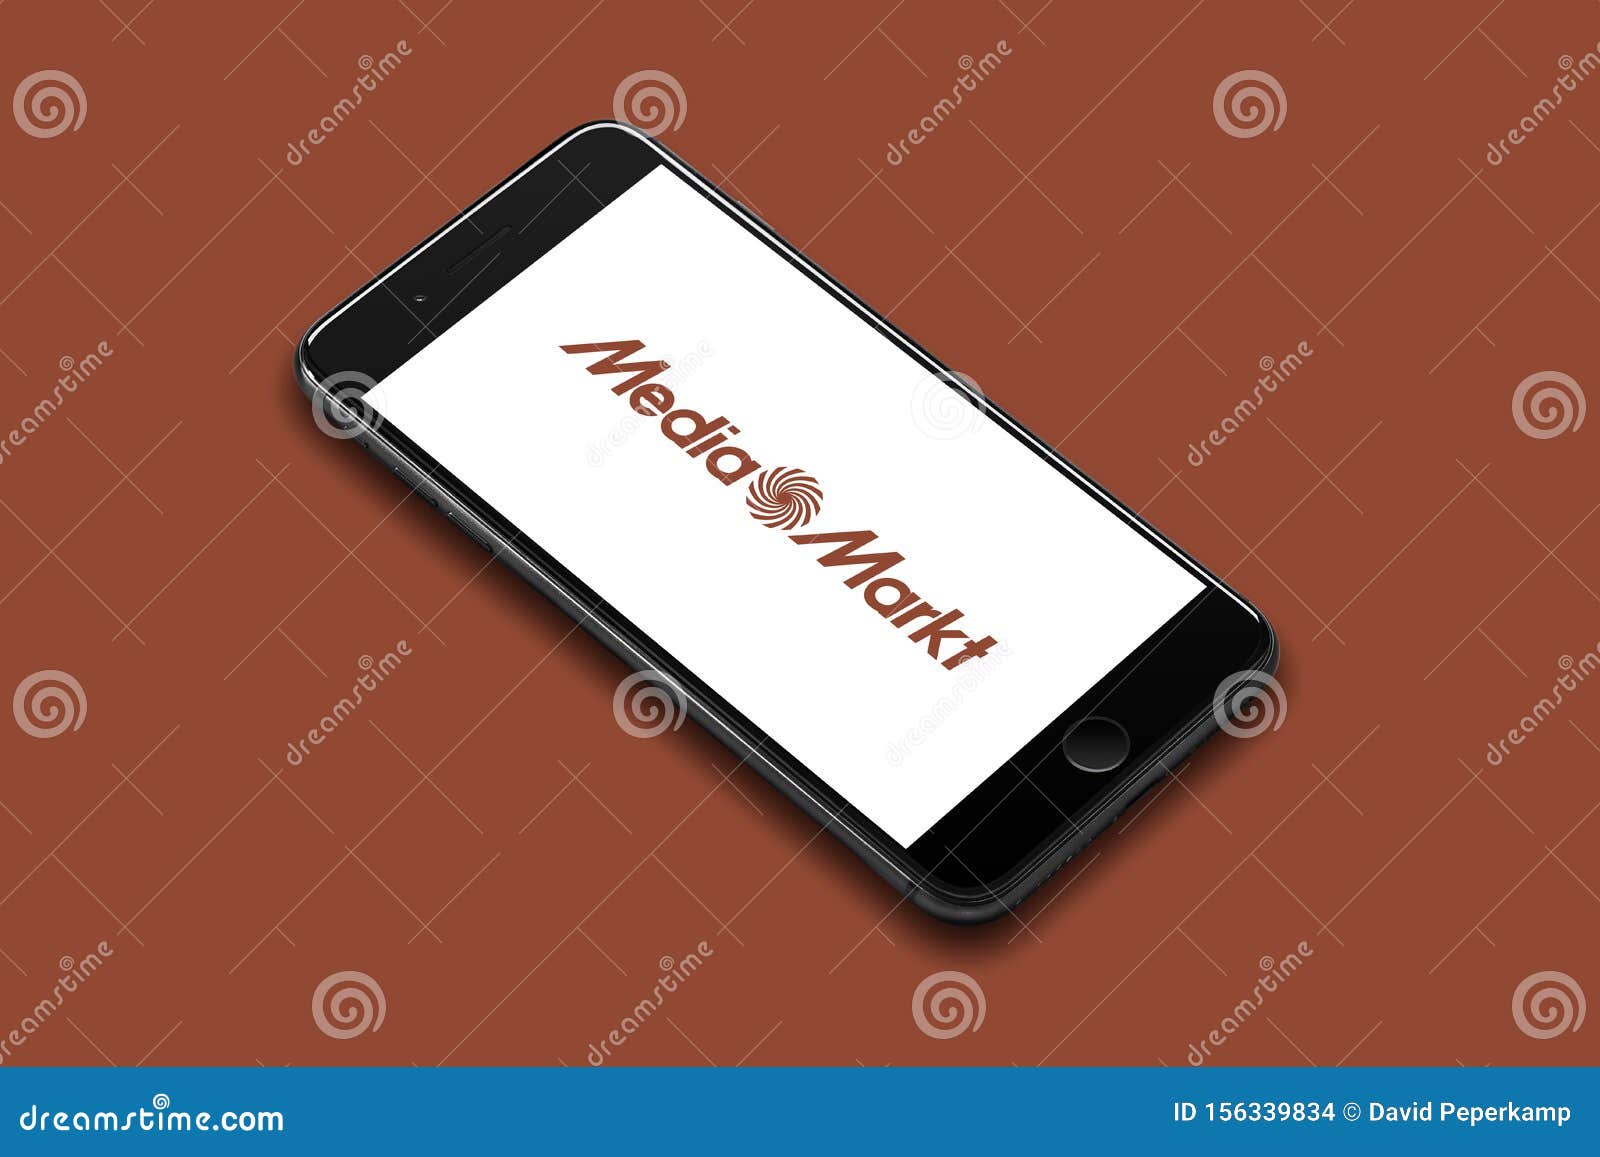 legaal Kracht Uil Amsterdam, the Netherlands, 08/18/2019, IPhone 8 Plus Smart Phone Lies on a  Flat Colored Surface. De Media Markt Corporated Logo O Editorial Stock  Image - Image of iphone, consumer: 156339834